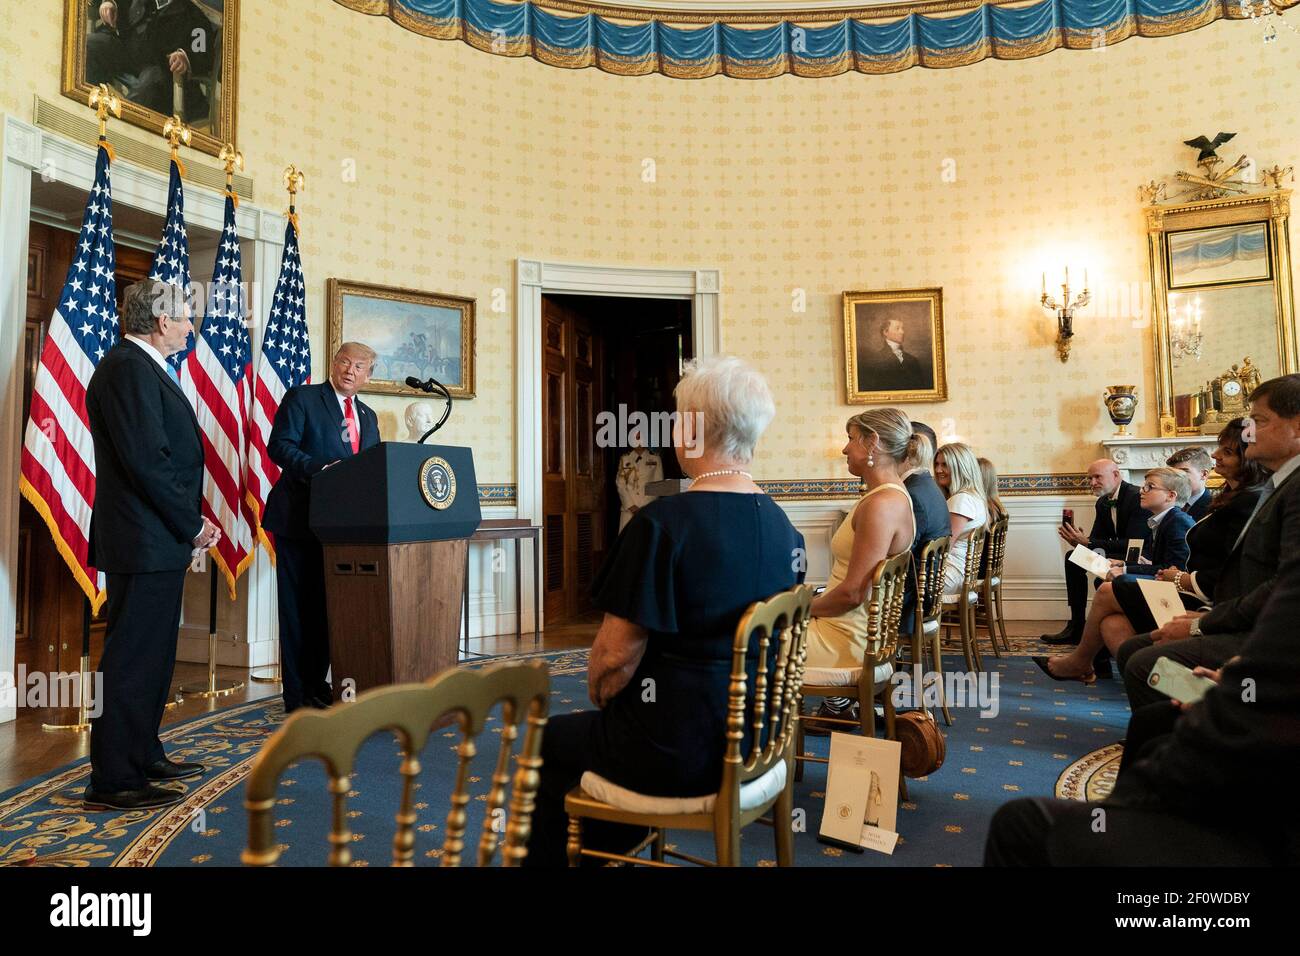 President Donald Trump addresses his remarks at the presentation of the Presidential Medal of Freedom to legendary American runner and former U.S. Representative Jim Ryun Friday July 24 2020 in the Blue Room of the White House. Stock Photo